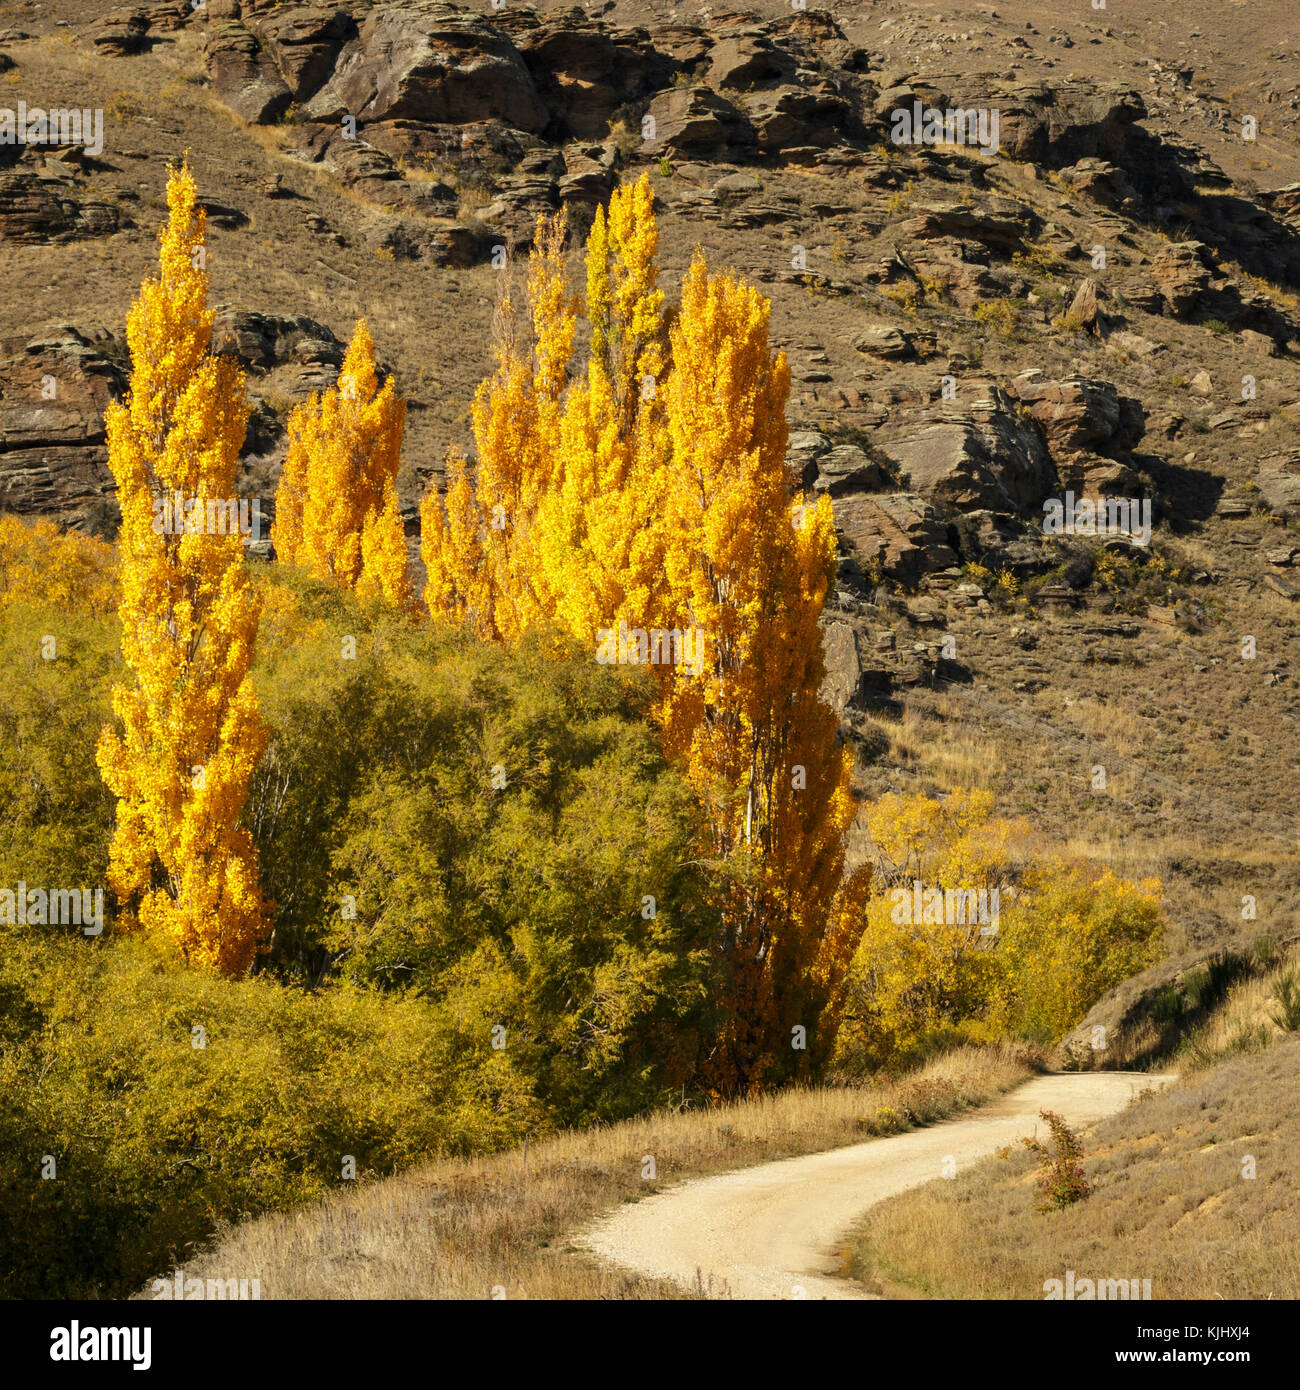 The Road to Nowhere. Autumn Poplars in Central Otago. Stock Photo